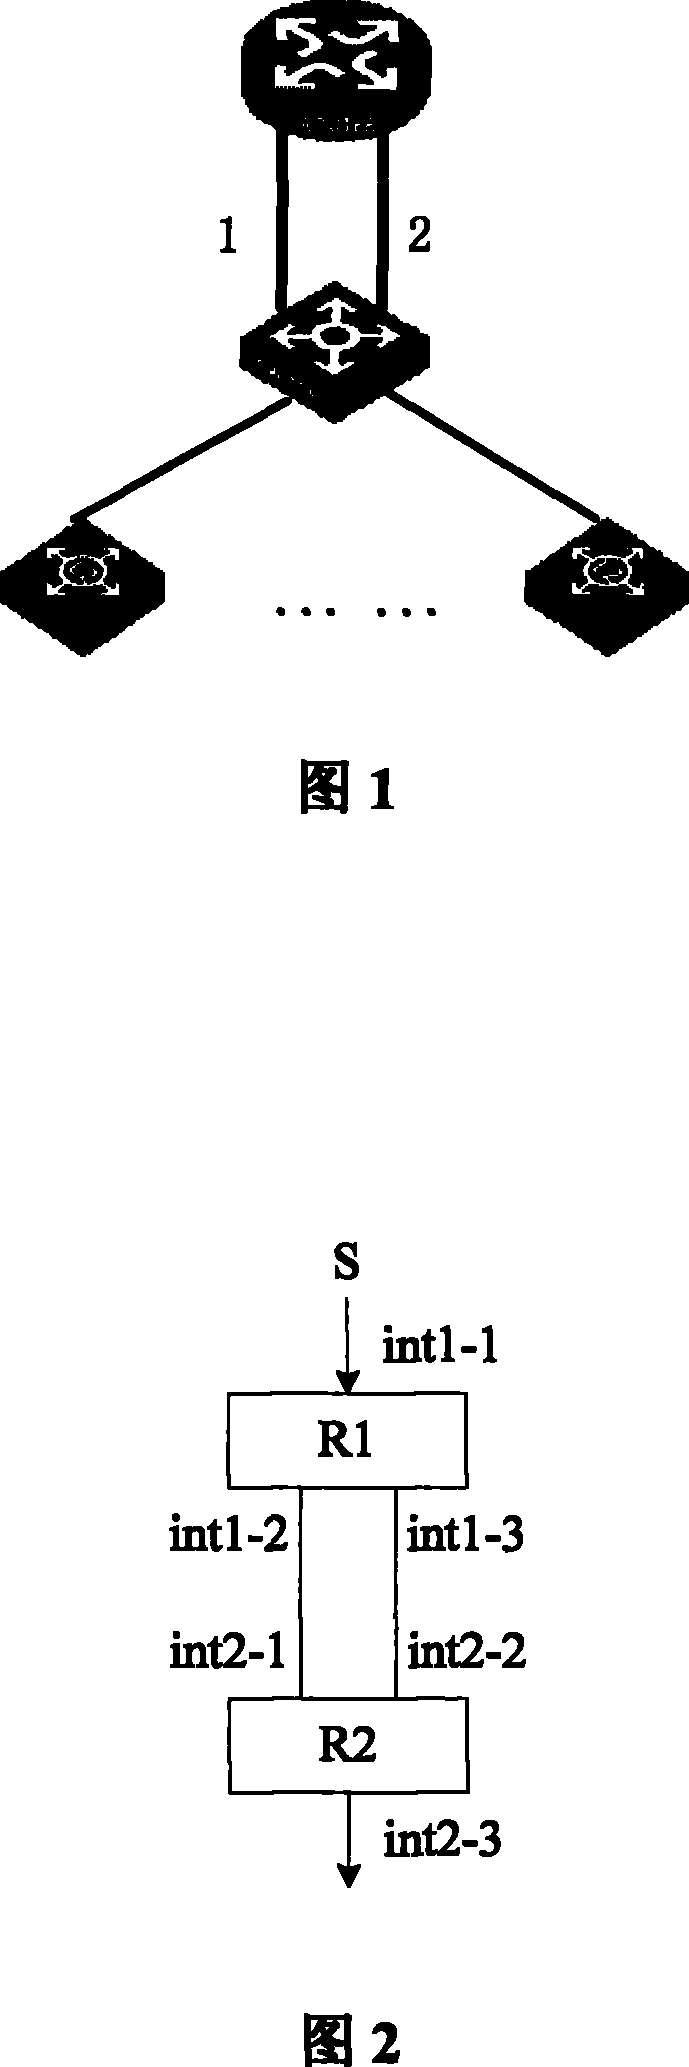 Status self-adapted method and device for non RPF interface